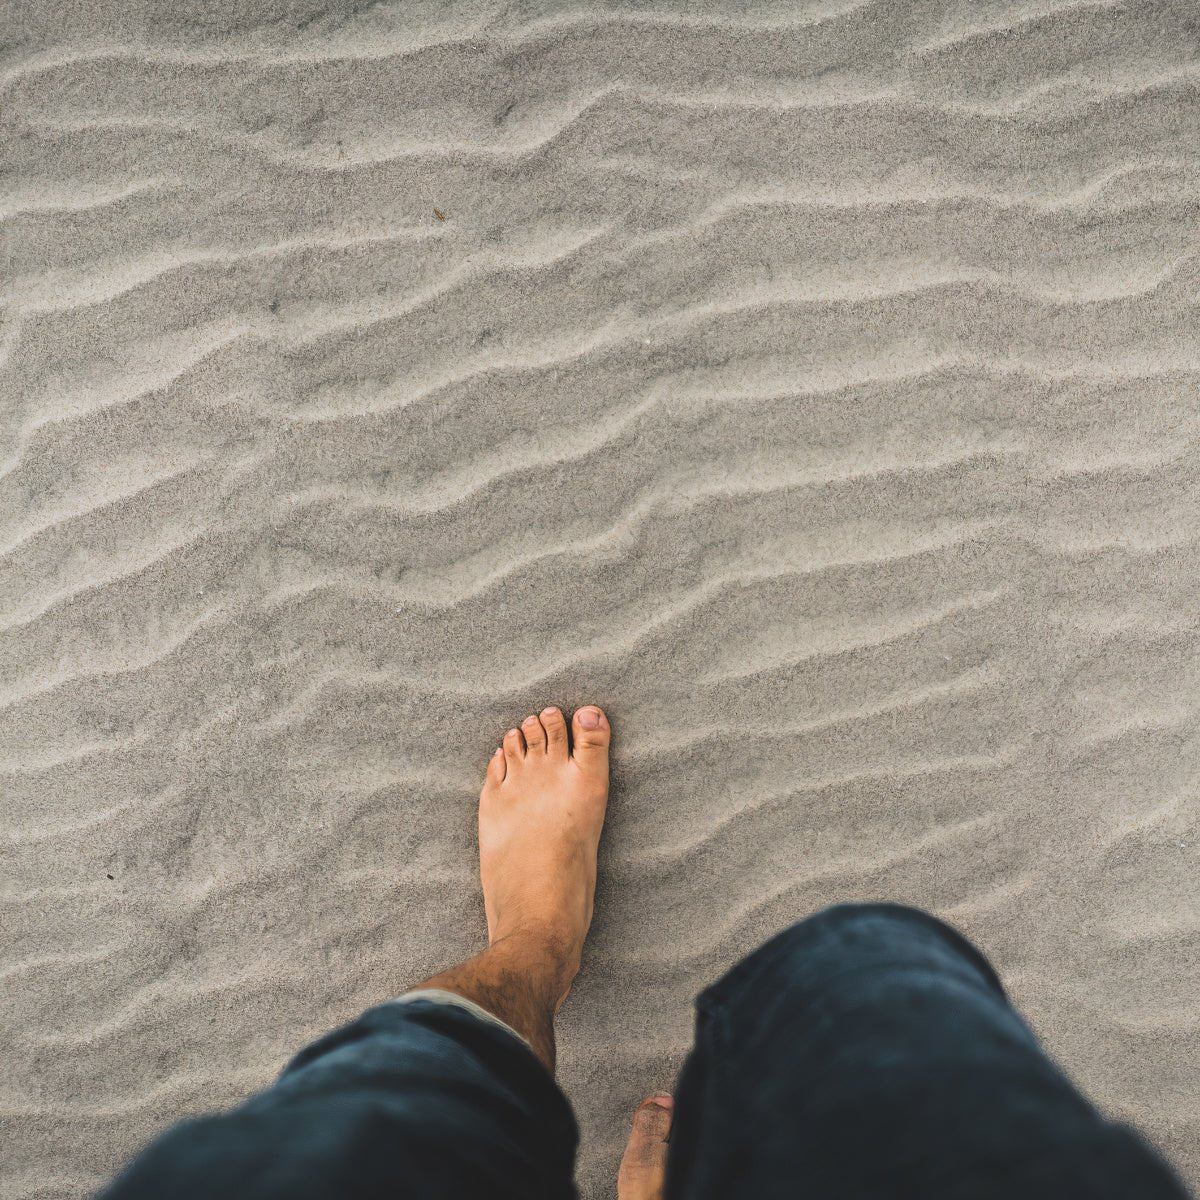 Earthing Debunked: What Is Grounding and How Does It Work? - bodybud